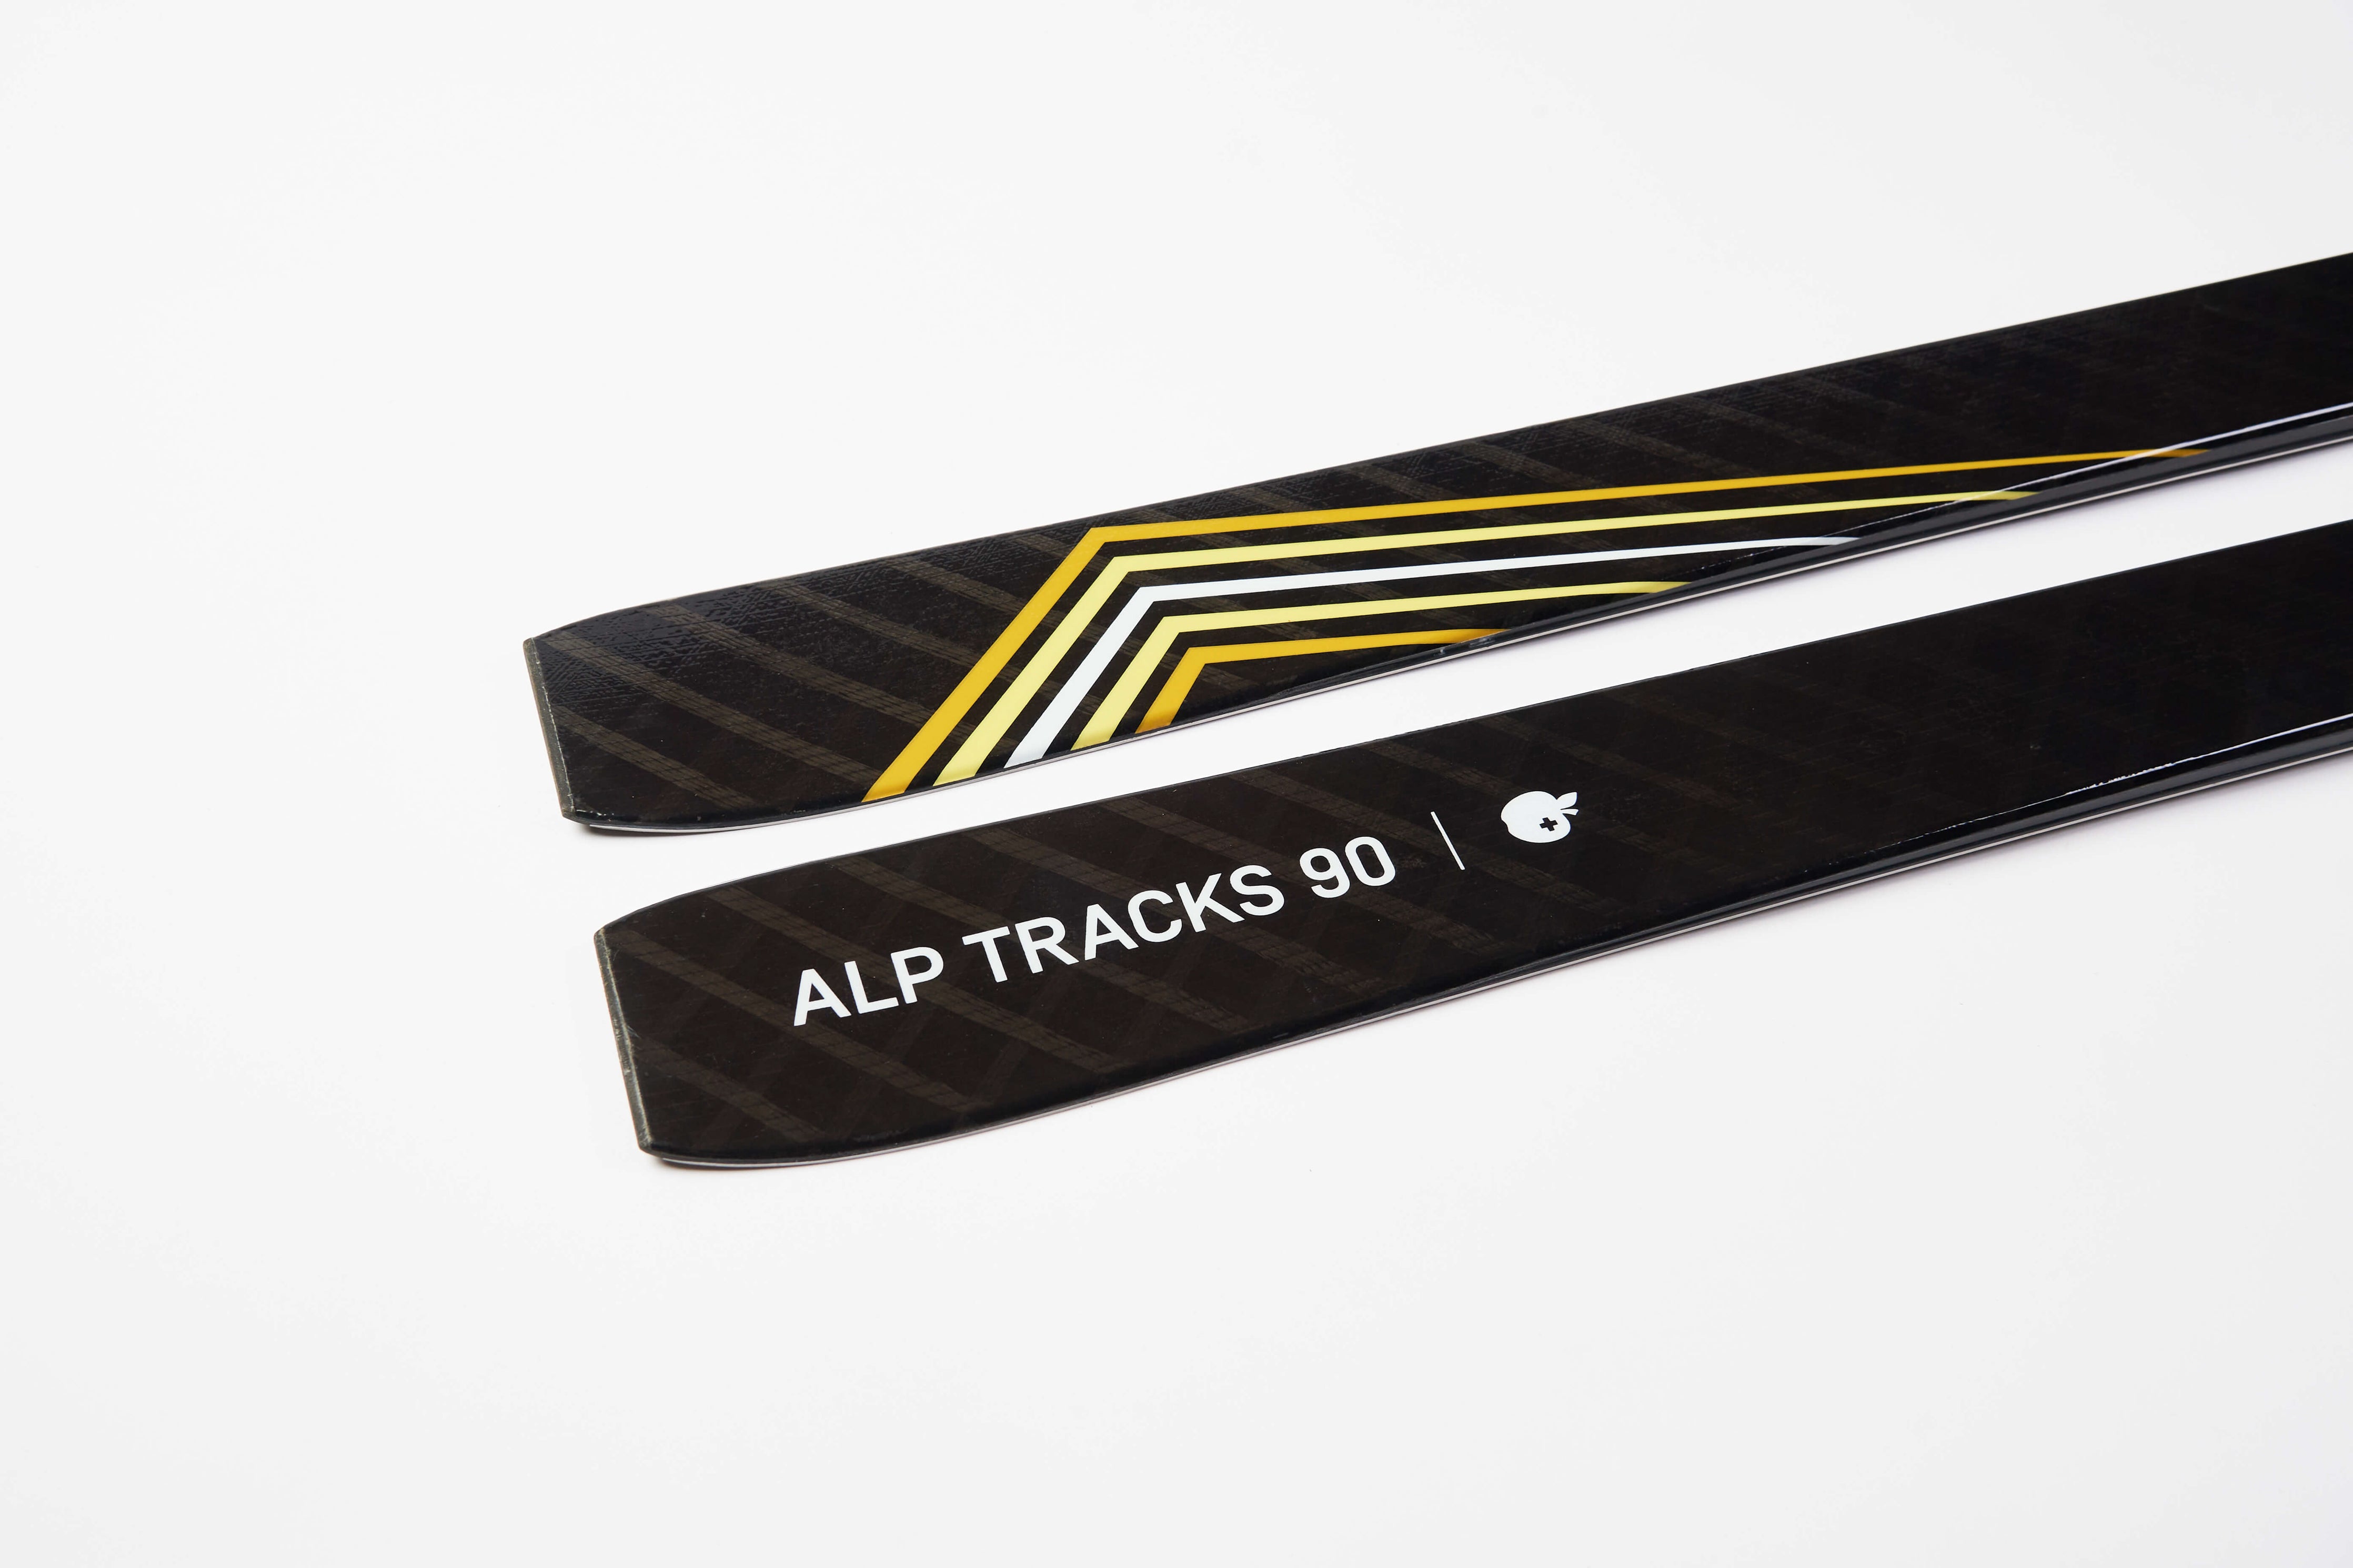 Forge unforgettable memories with Movement's Alp Tracks 90 touring skis.